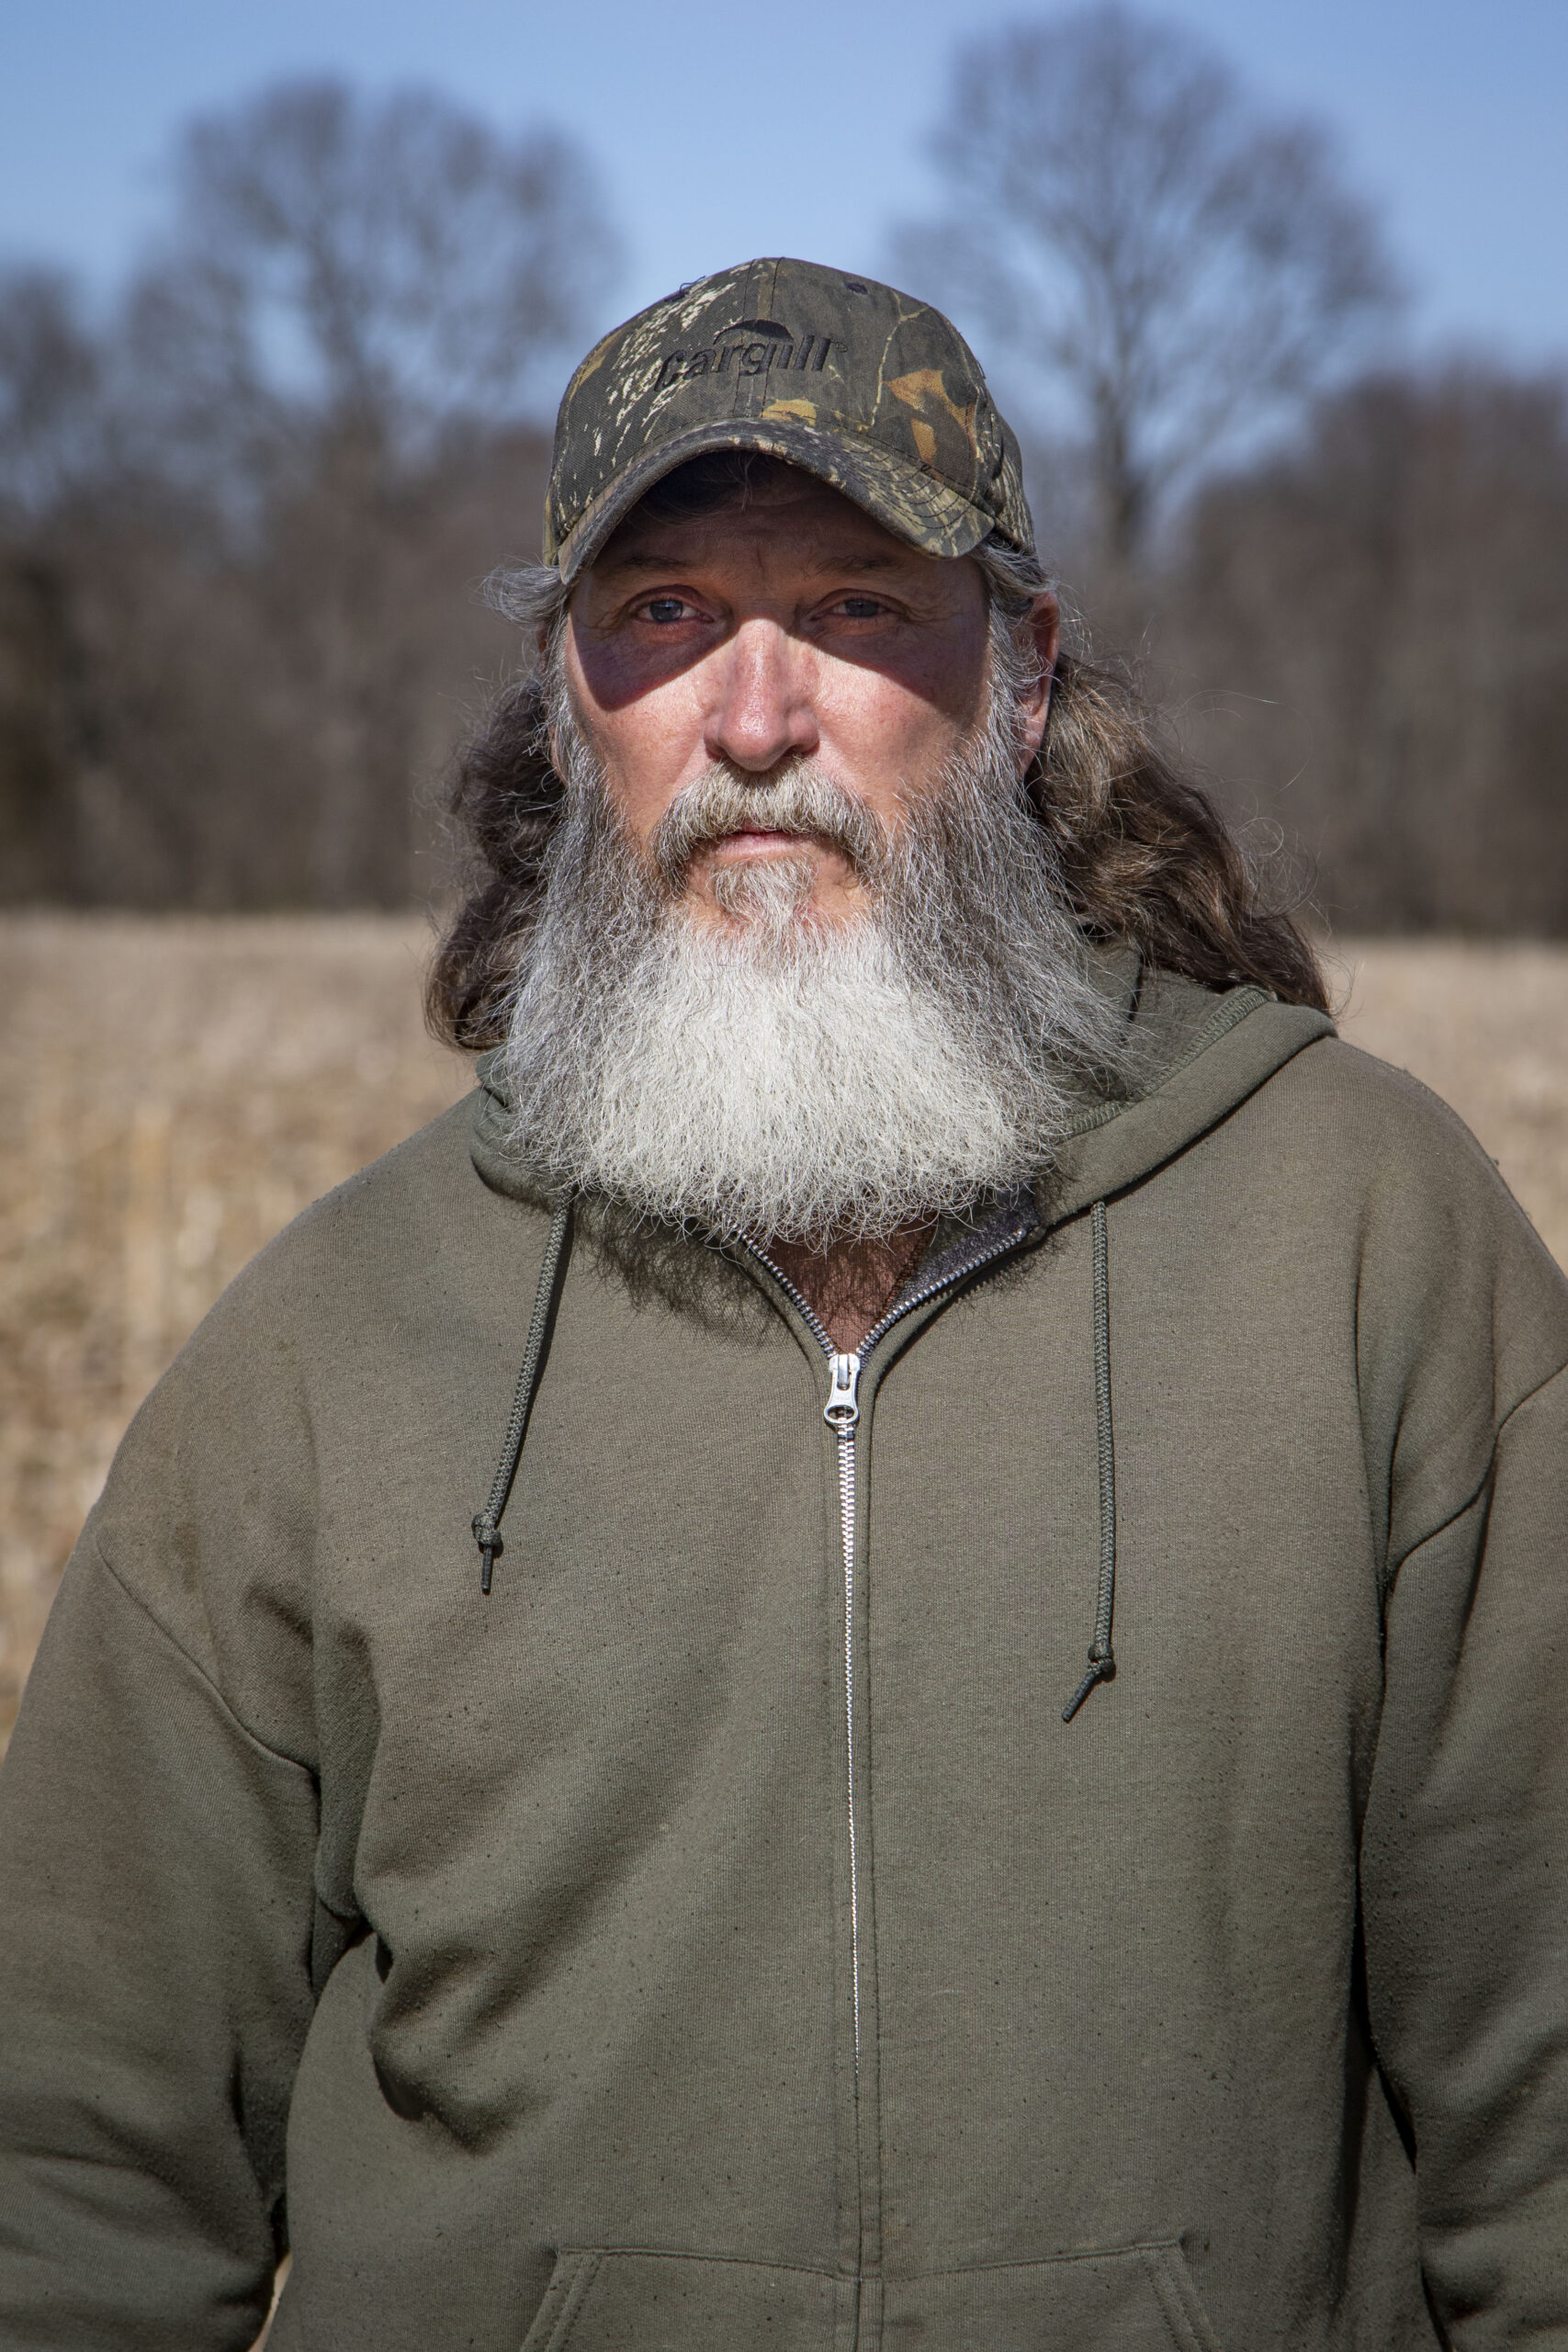 Portrait of Jeff Crabtree, witness to the Reelfoot Lake shooting.